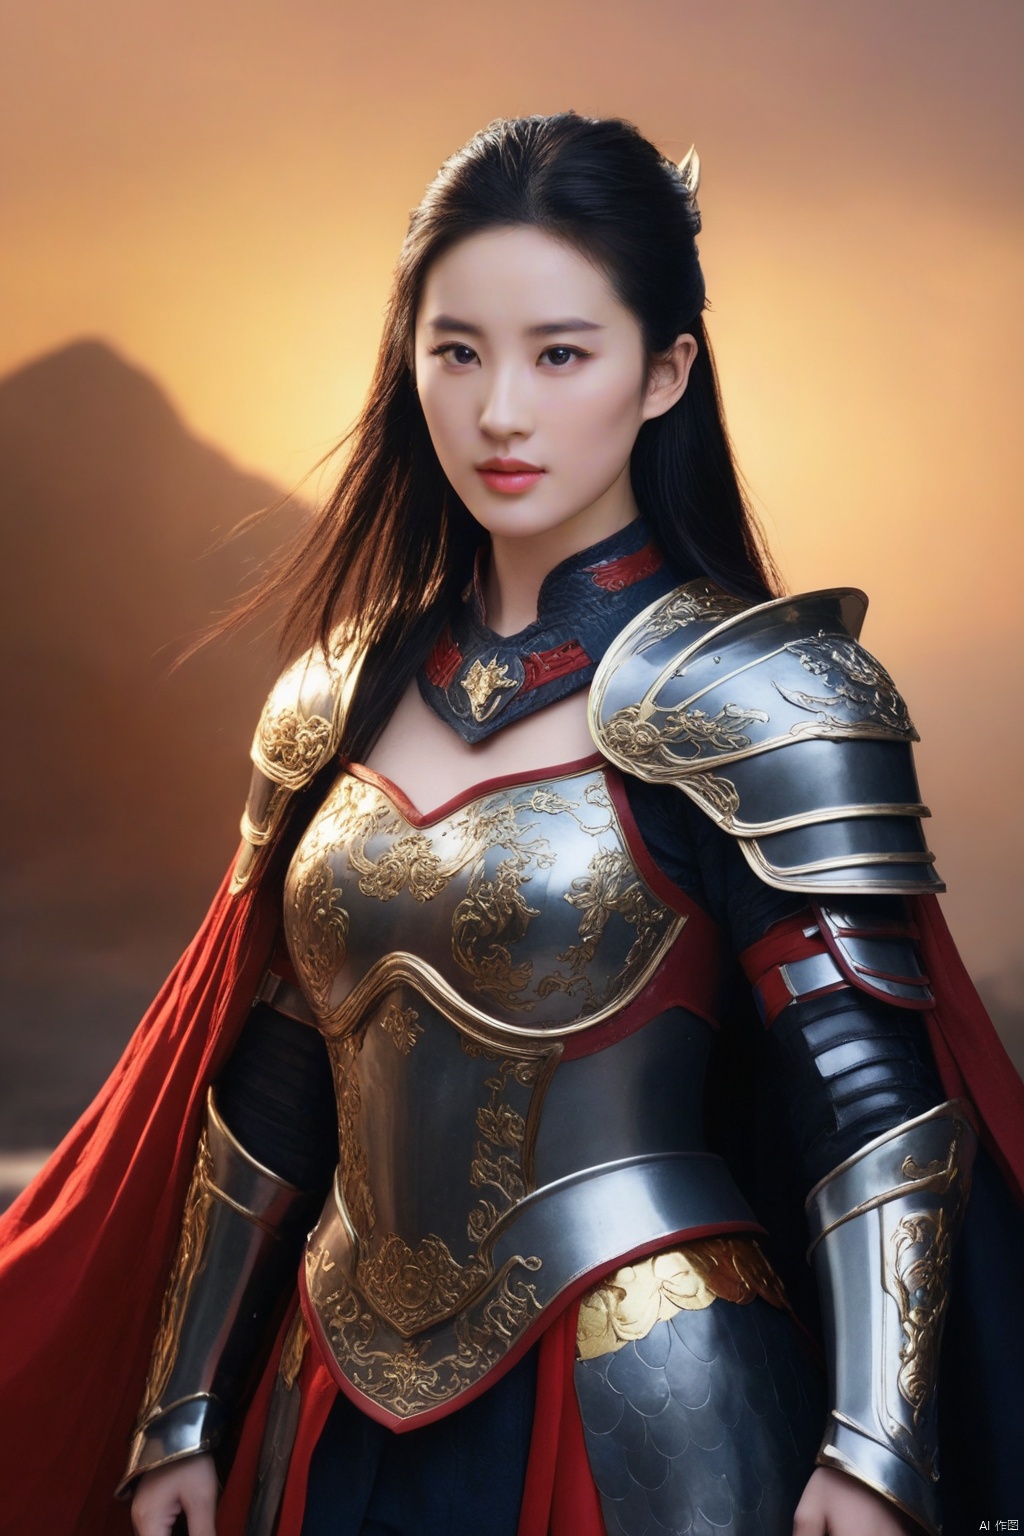  (masterpiece:1.1), (best quality:1.1),(ultra-detailed:1.1), realistic,best fingers,magnificent, epic,fantasy art, cover art, dreamy,cinematic,rich deep colors,creative, perfect, beautiful composition, intricate, perfect eyes, detailed a chinese girl, Large breasts, Chinese_armor, Women's armor,upper_body,helmet,shoulder_armor,looking at viewer,cloak, black hair,sunlight,cape,sunset,liuyifei